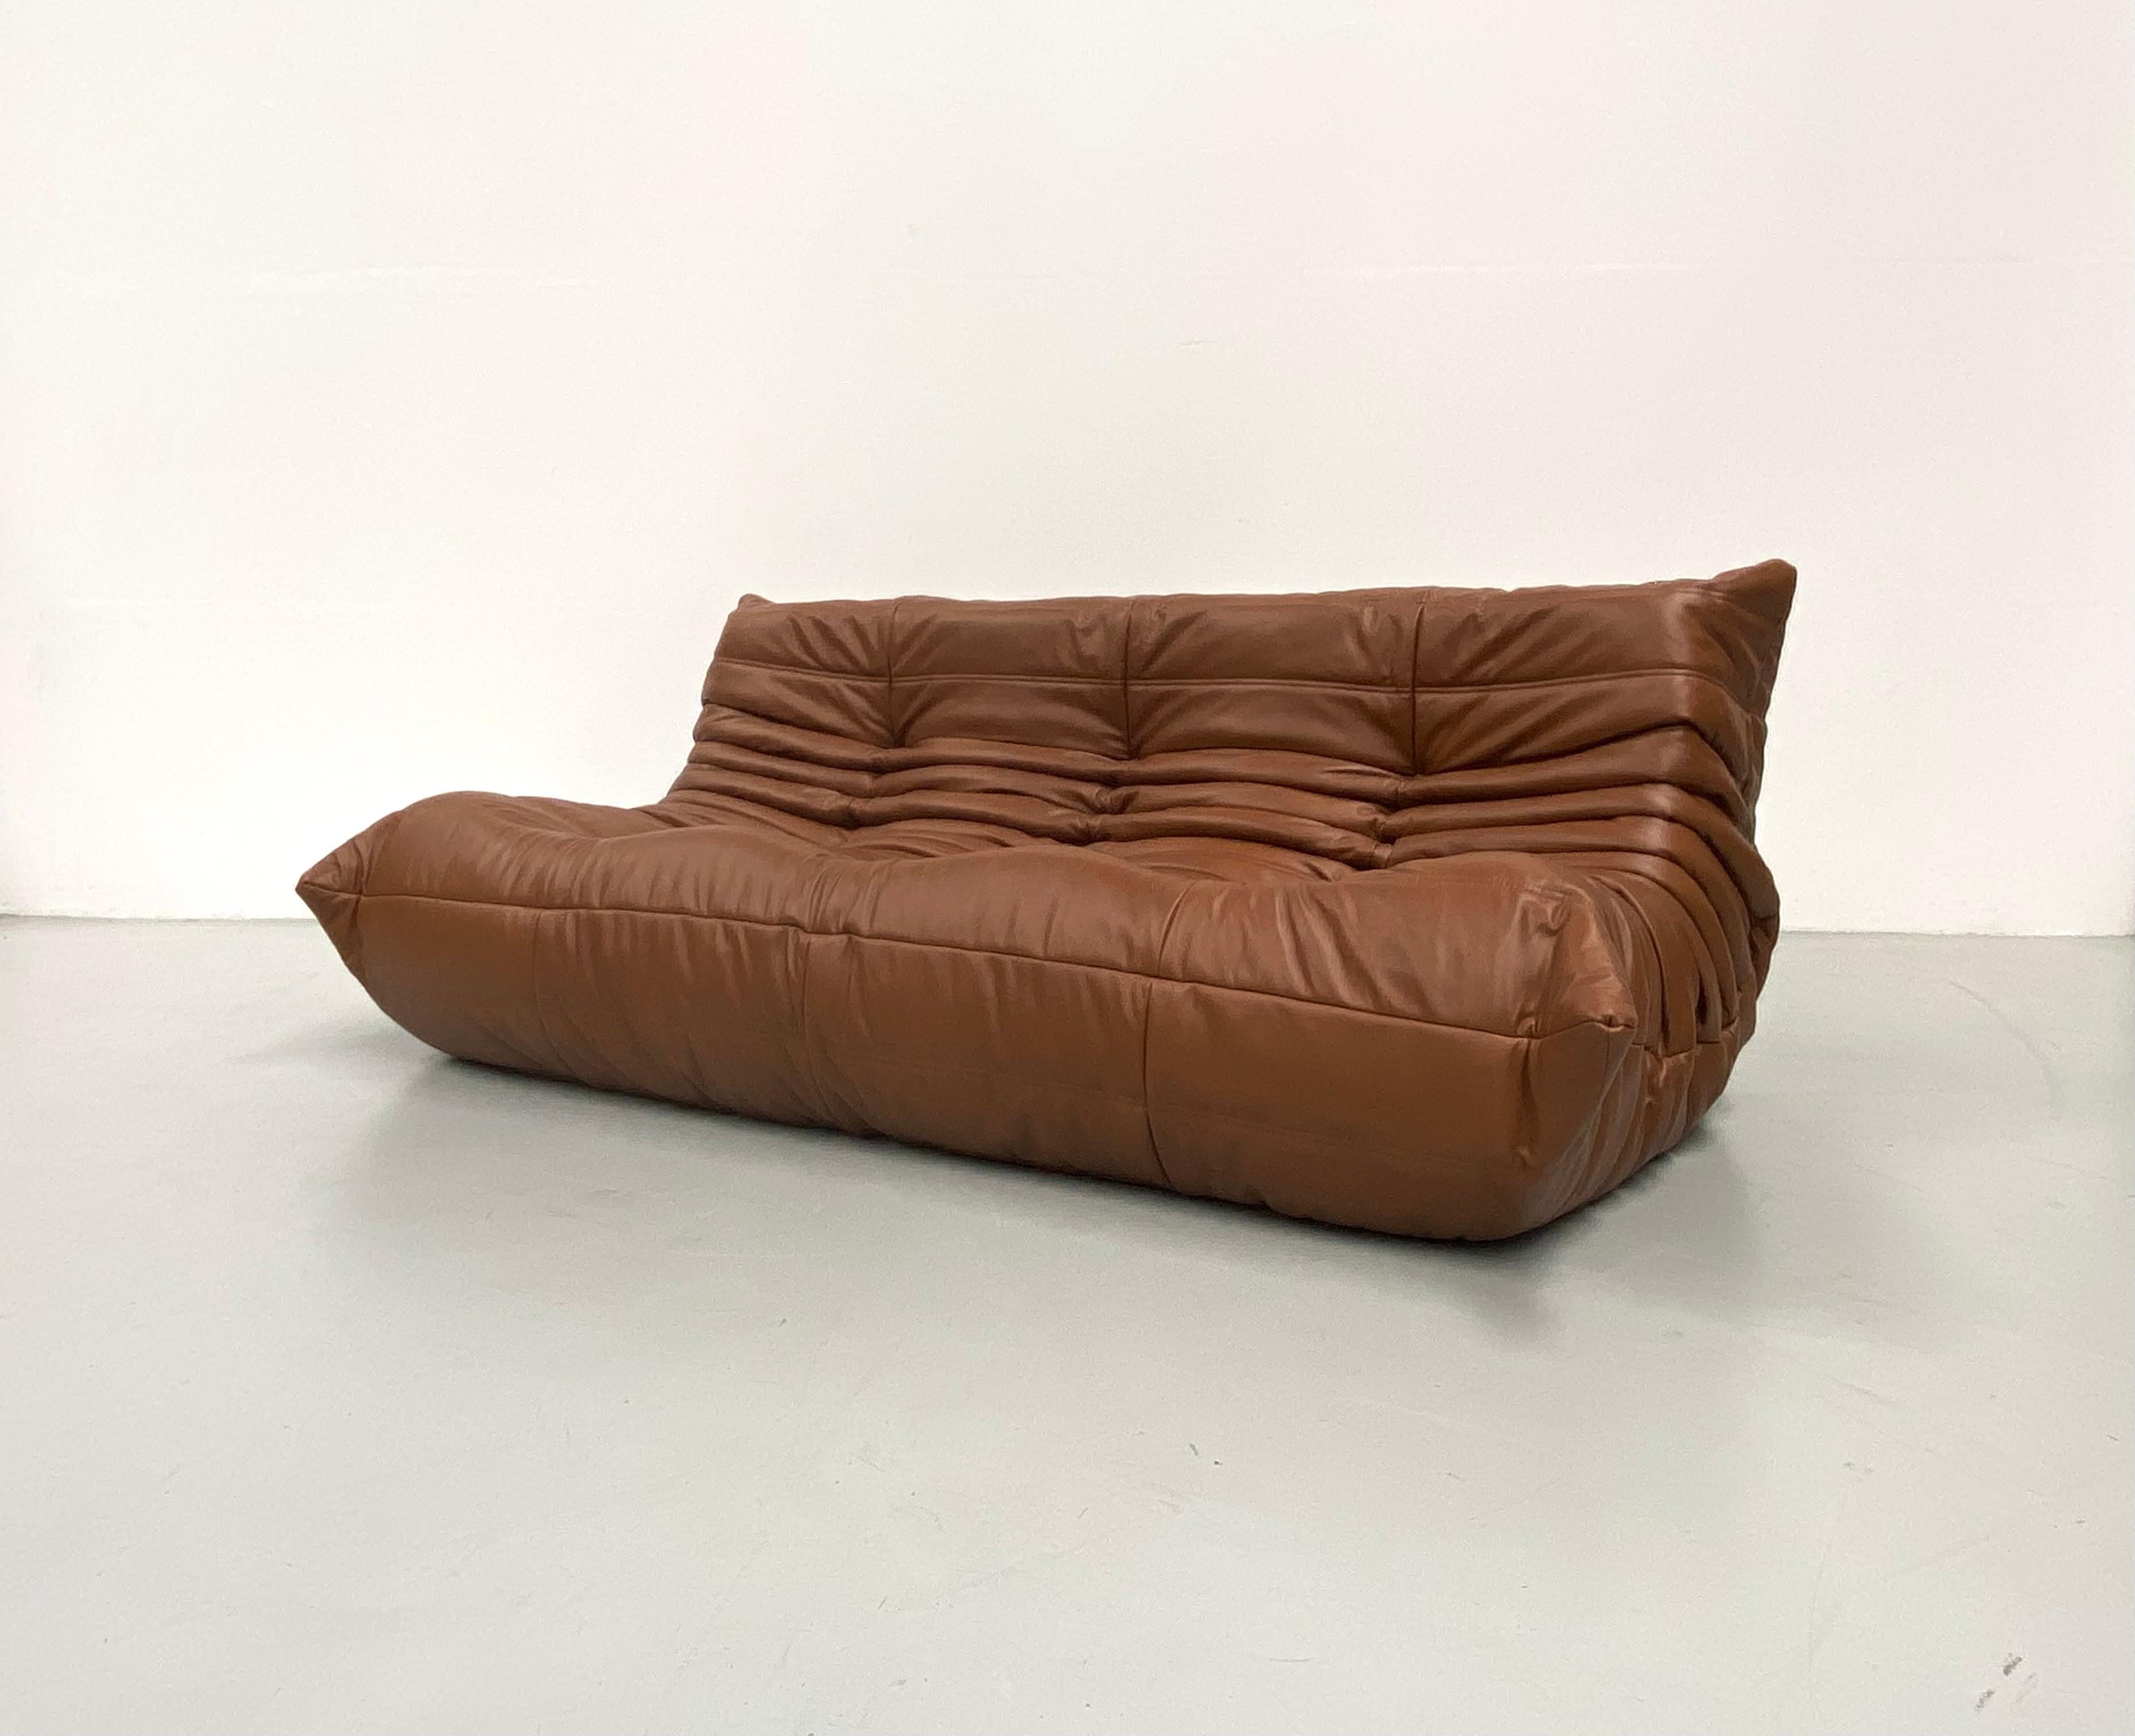 The Togo was designed by Michel Ducaroy in 1973.  It is the first sofa/chair ever made only of foam and leather. The innerwork consists of foam in 5 different densities. Manufactured by Ligne Roset in France.